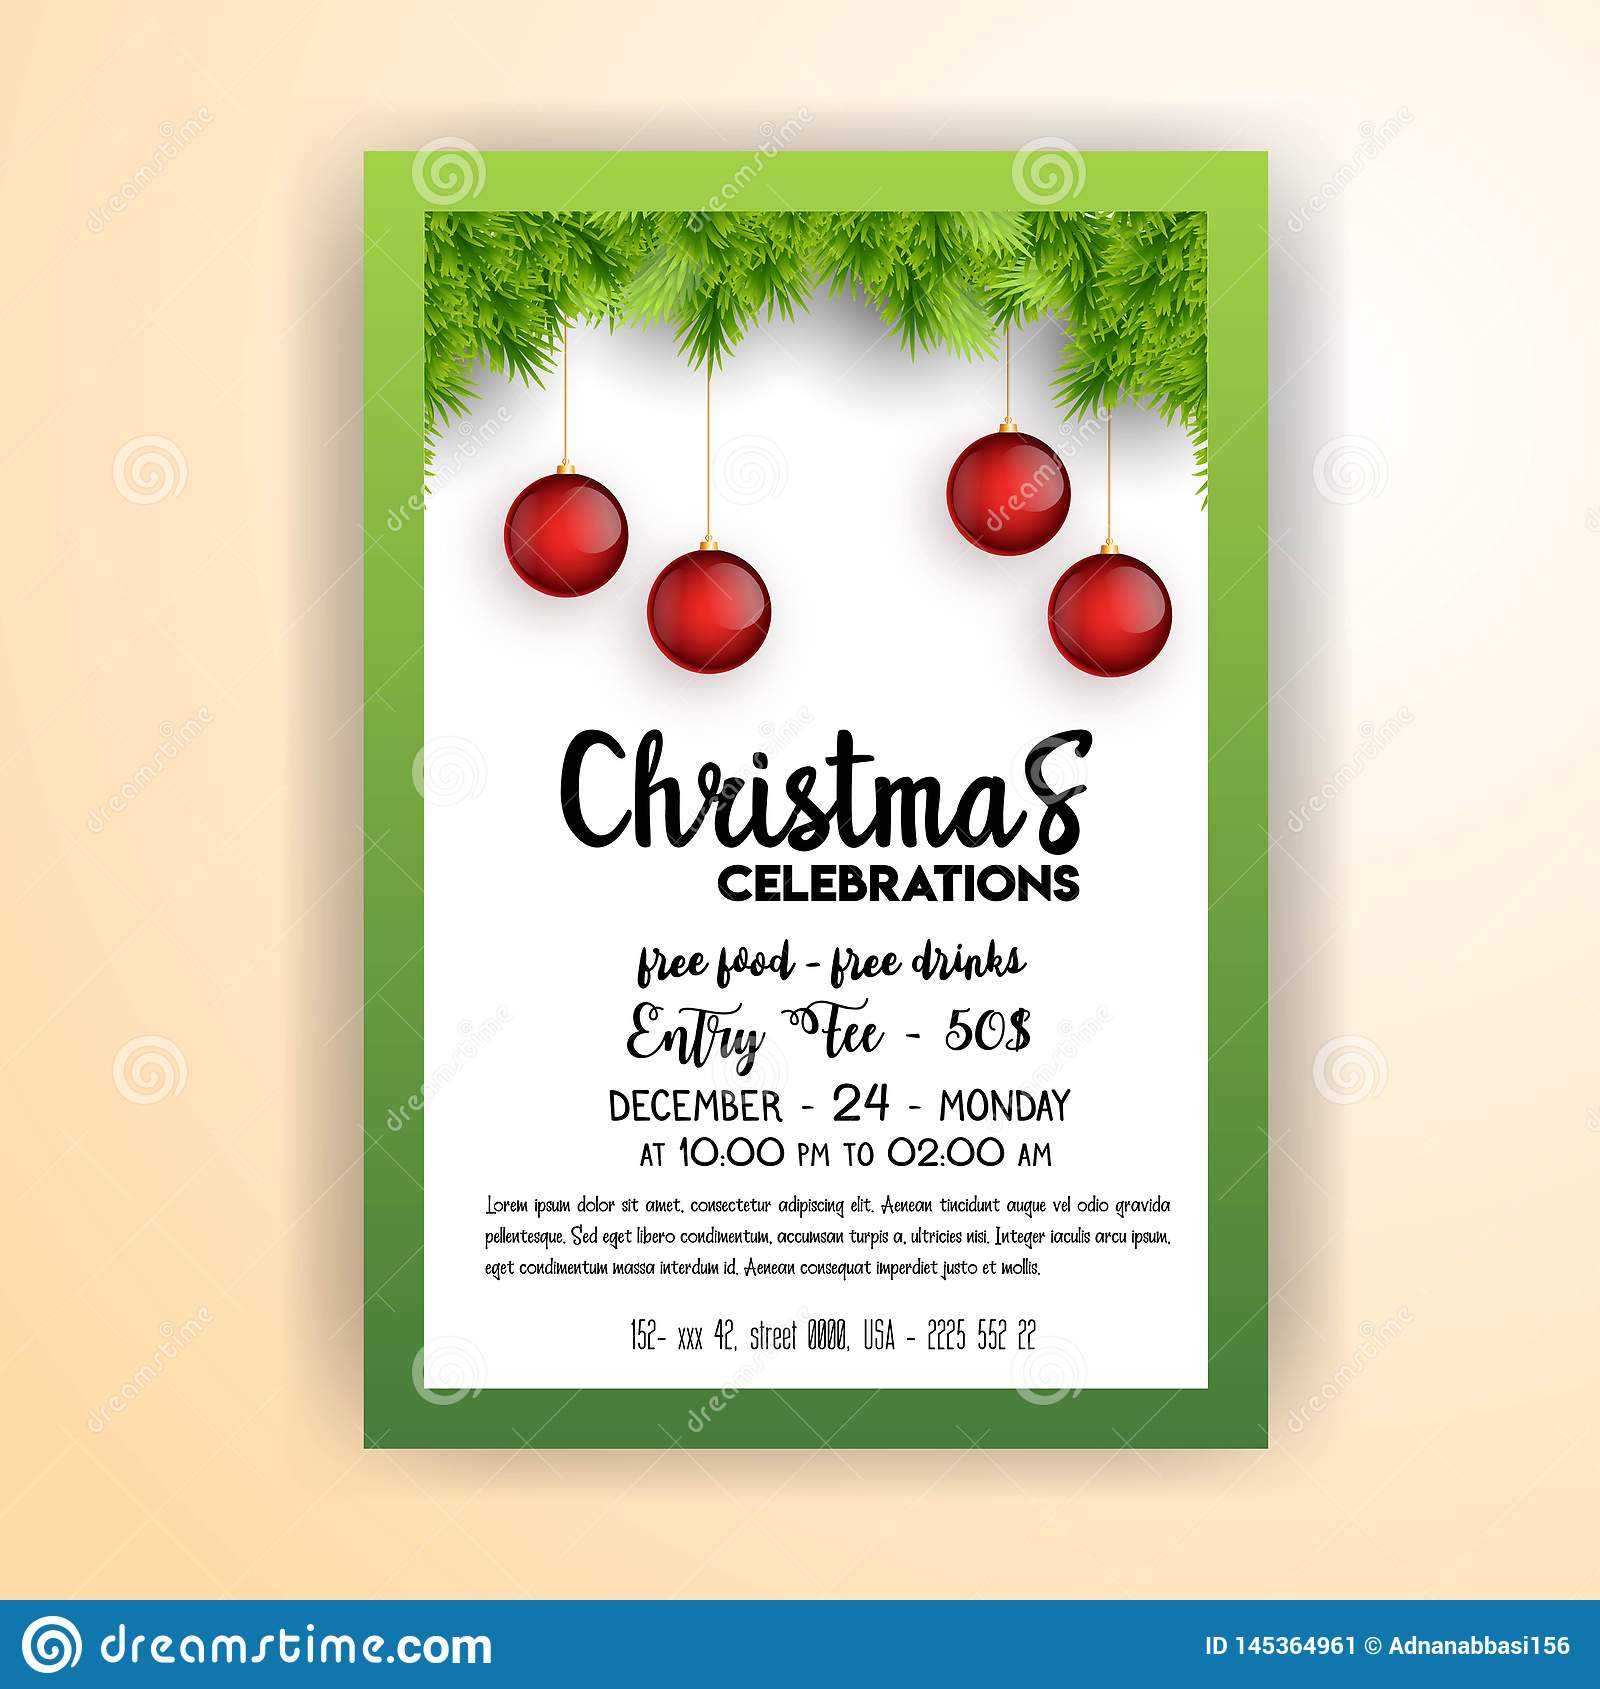 Vintage Christmas Party Flyer Template Stock Vector Pertaining To Christmas Brochure Templates Free